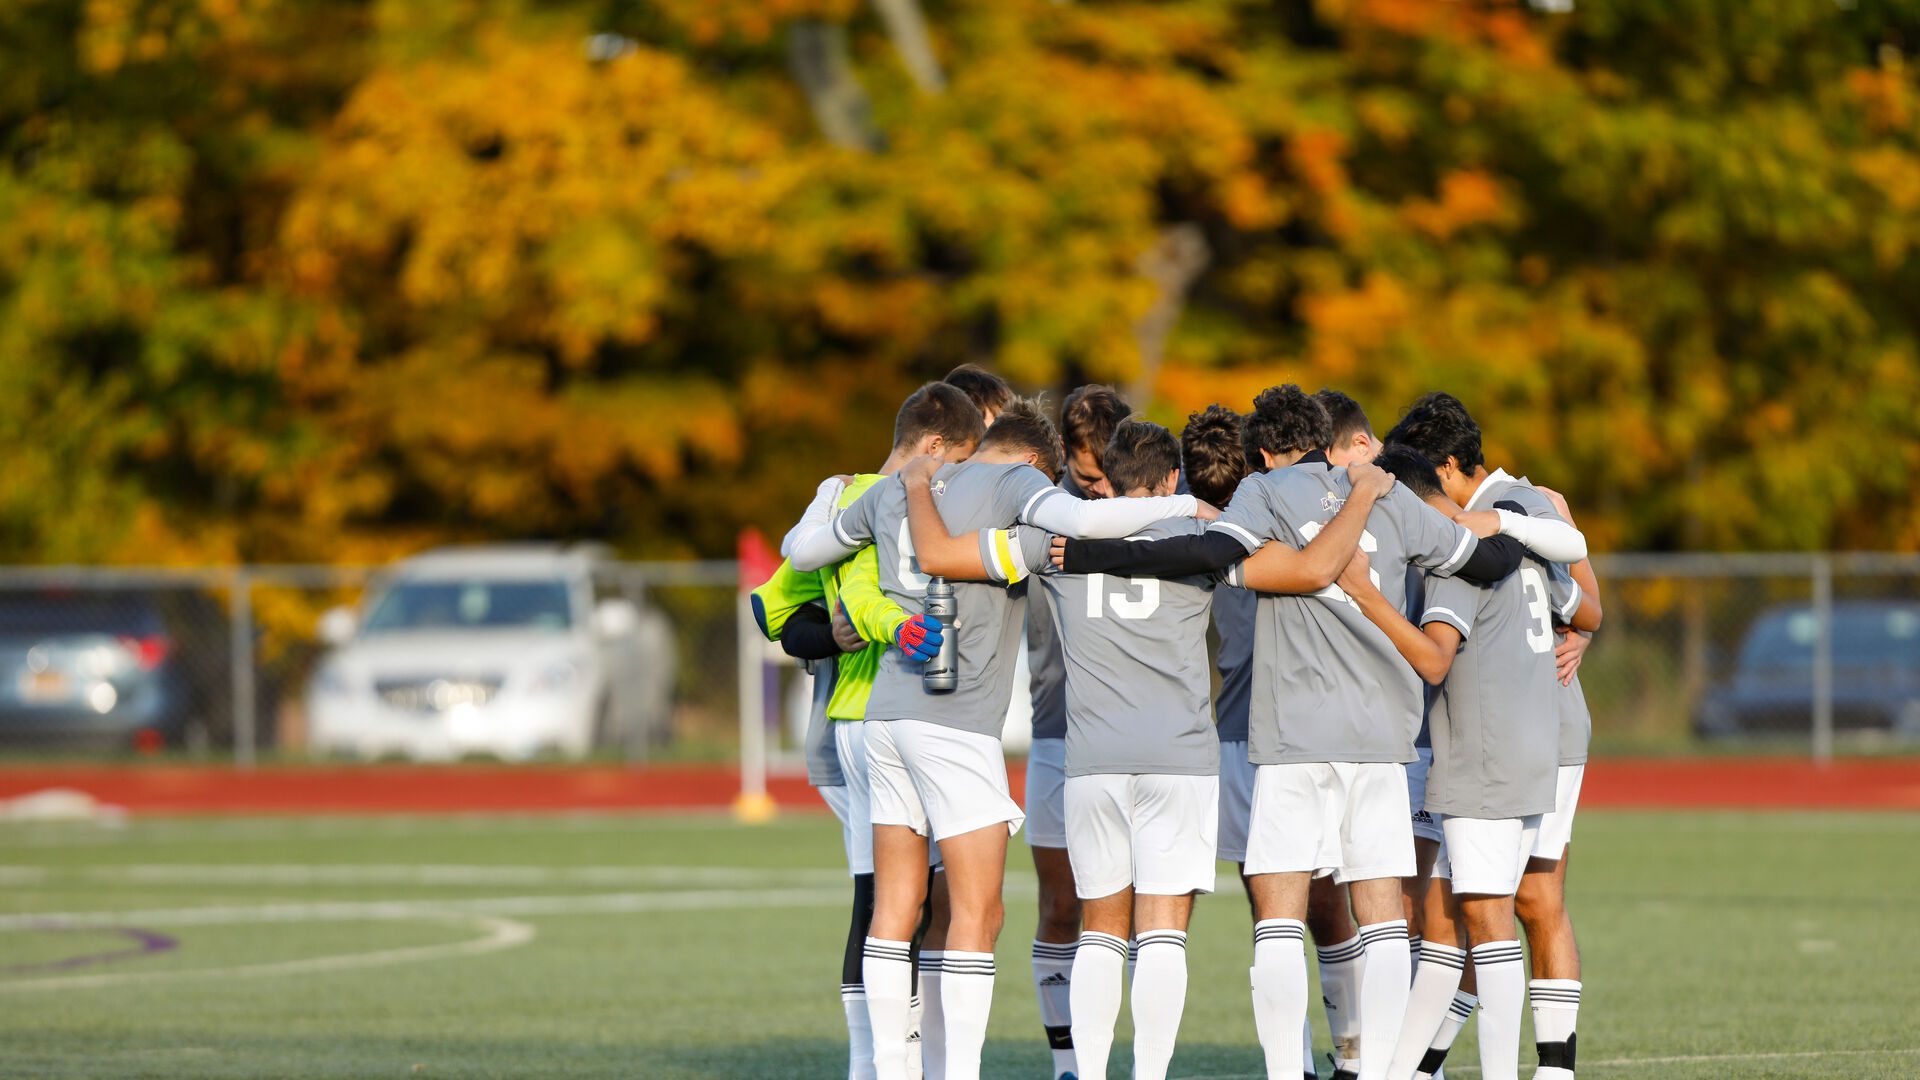 Houghton mens soccer team standing together in a huddle on the field.